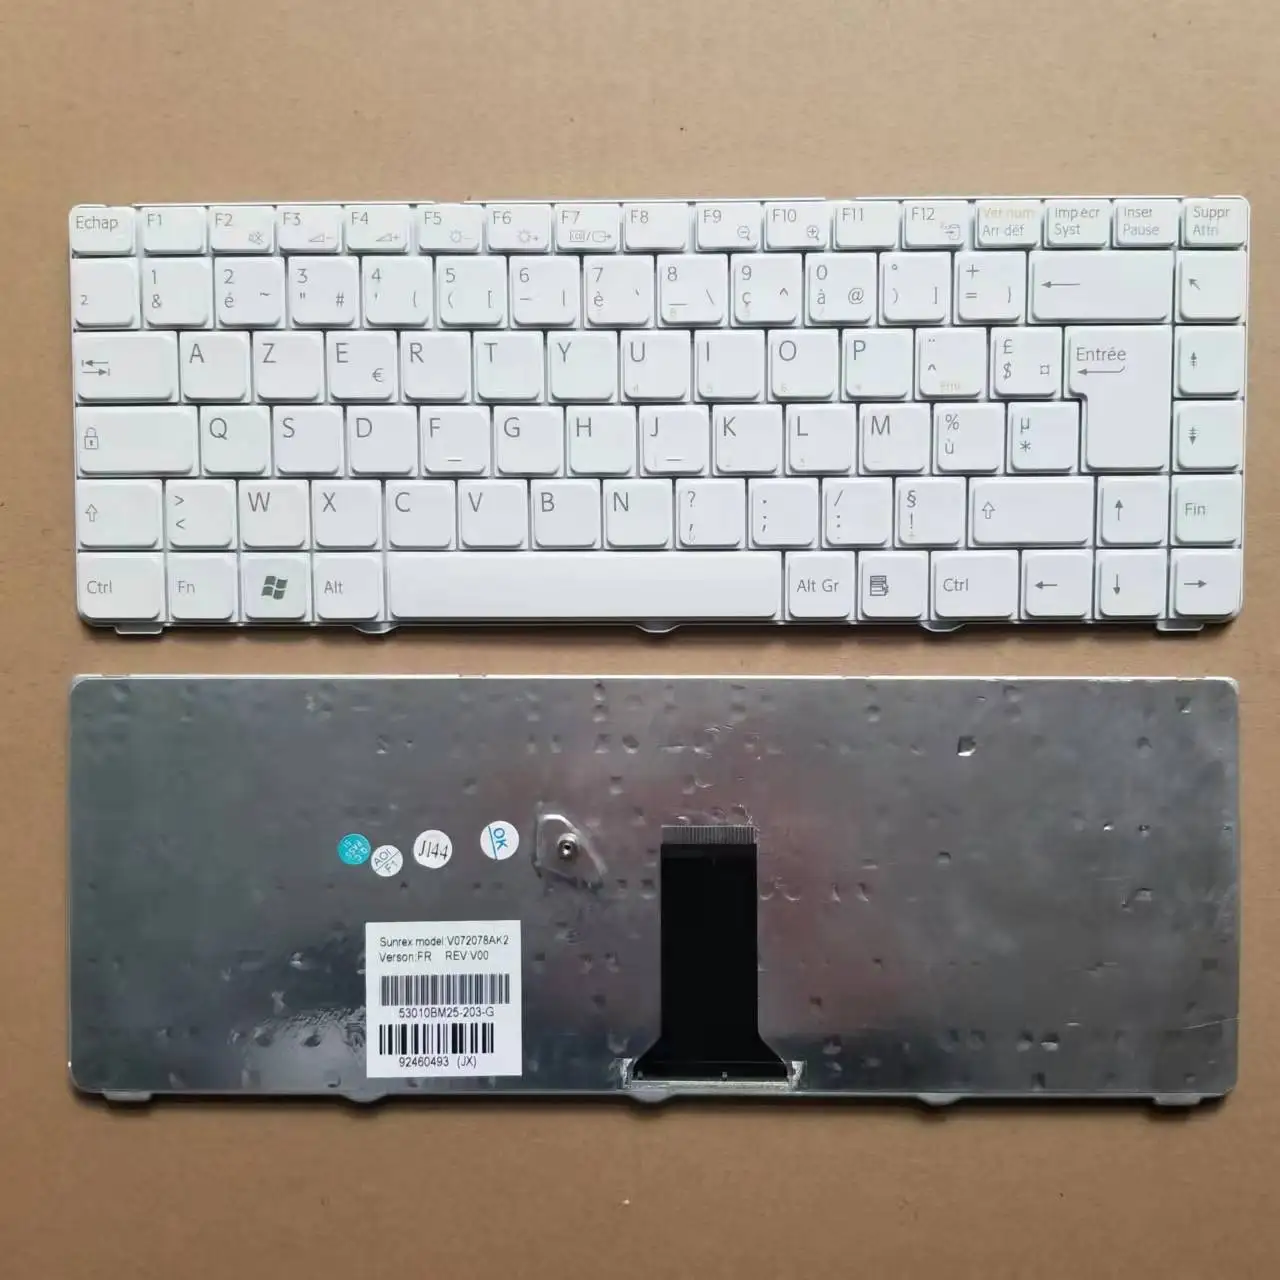 

New For Sony Vaio NS NR VGN-NS VGN-NR Series French FR Clavier Laptop Keyboard White V072078AK2